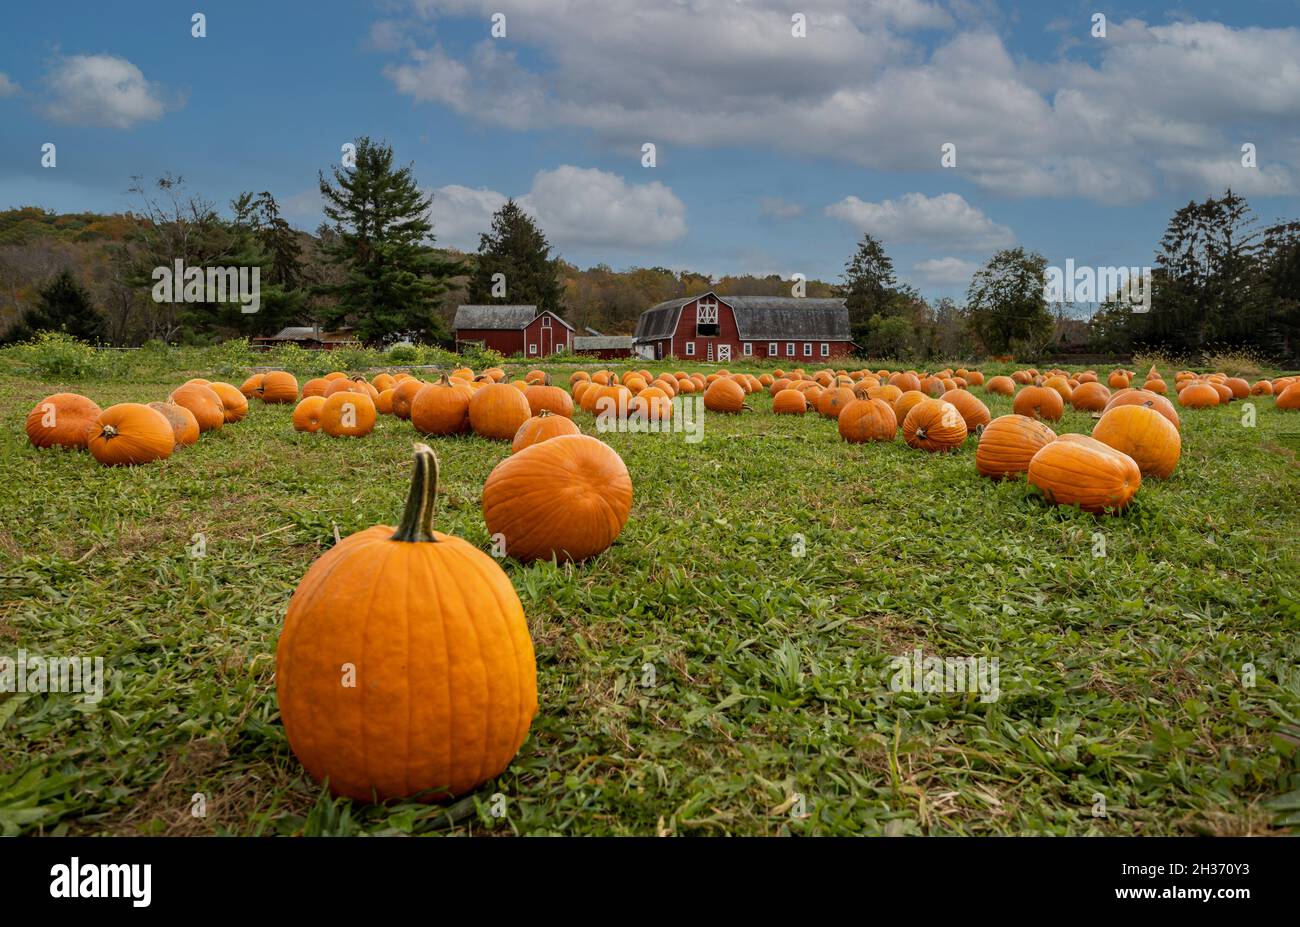 Pumpkins arranged on grass field in front of old red barn and corn stalks under blue cloudy sky for fun fall family activity Stock Photo